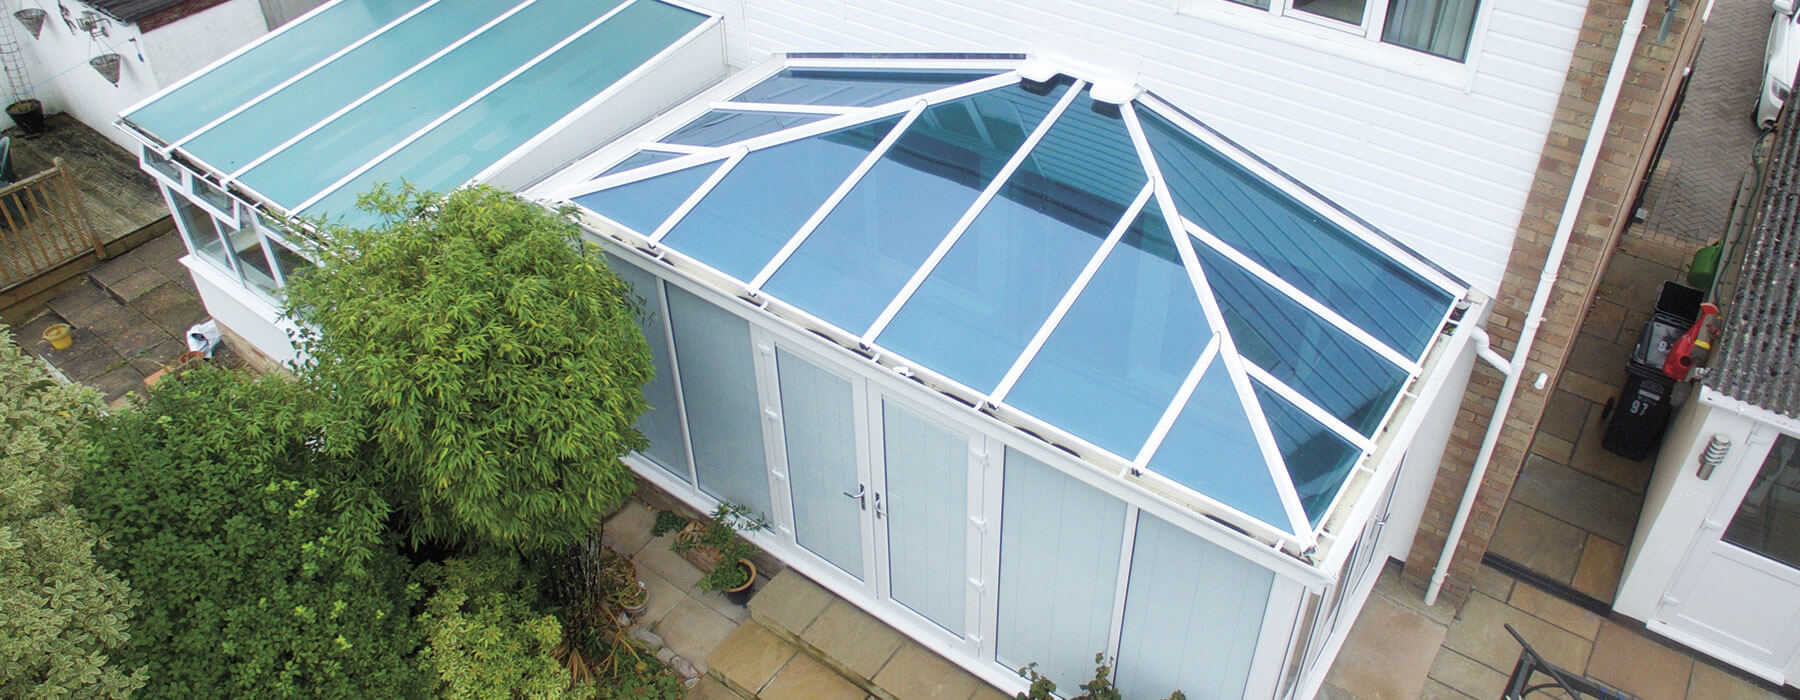 birdseye view of edwardian conservatory with glass roof